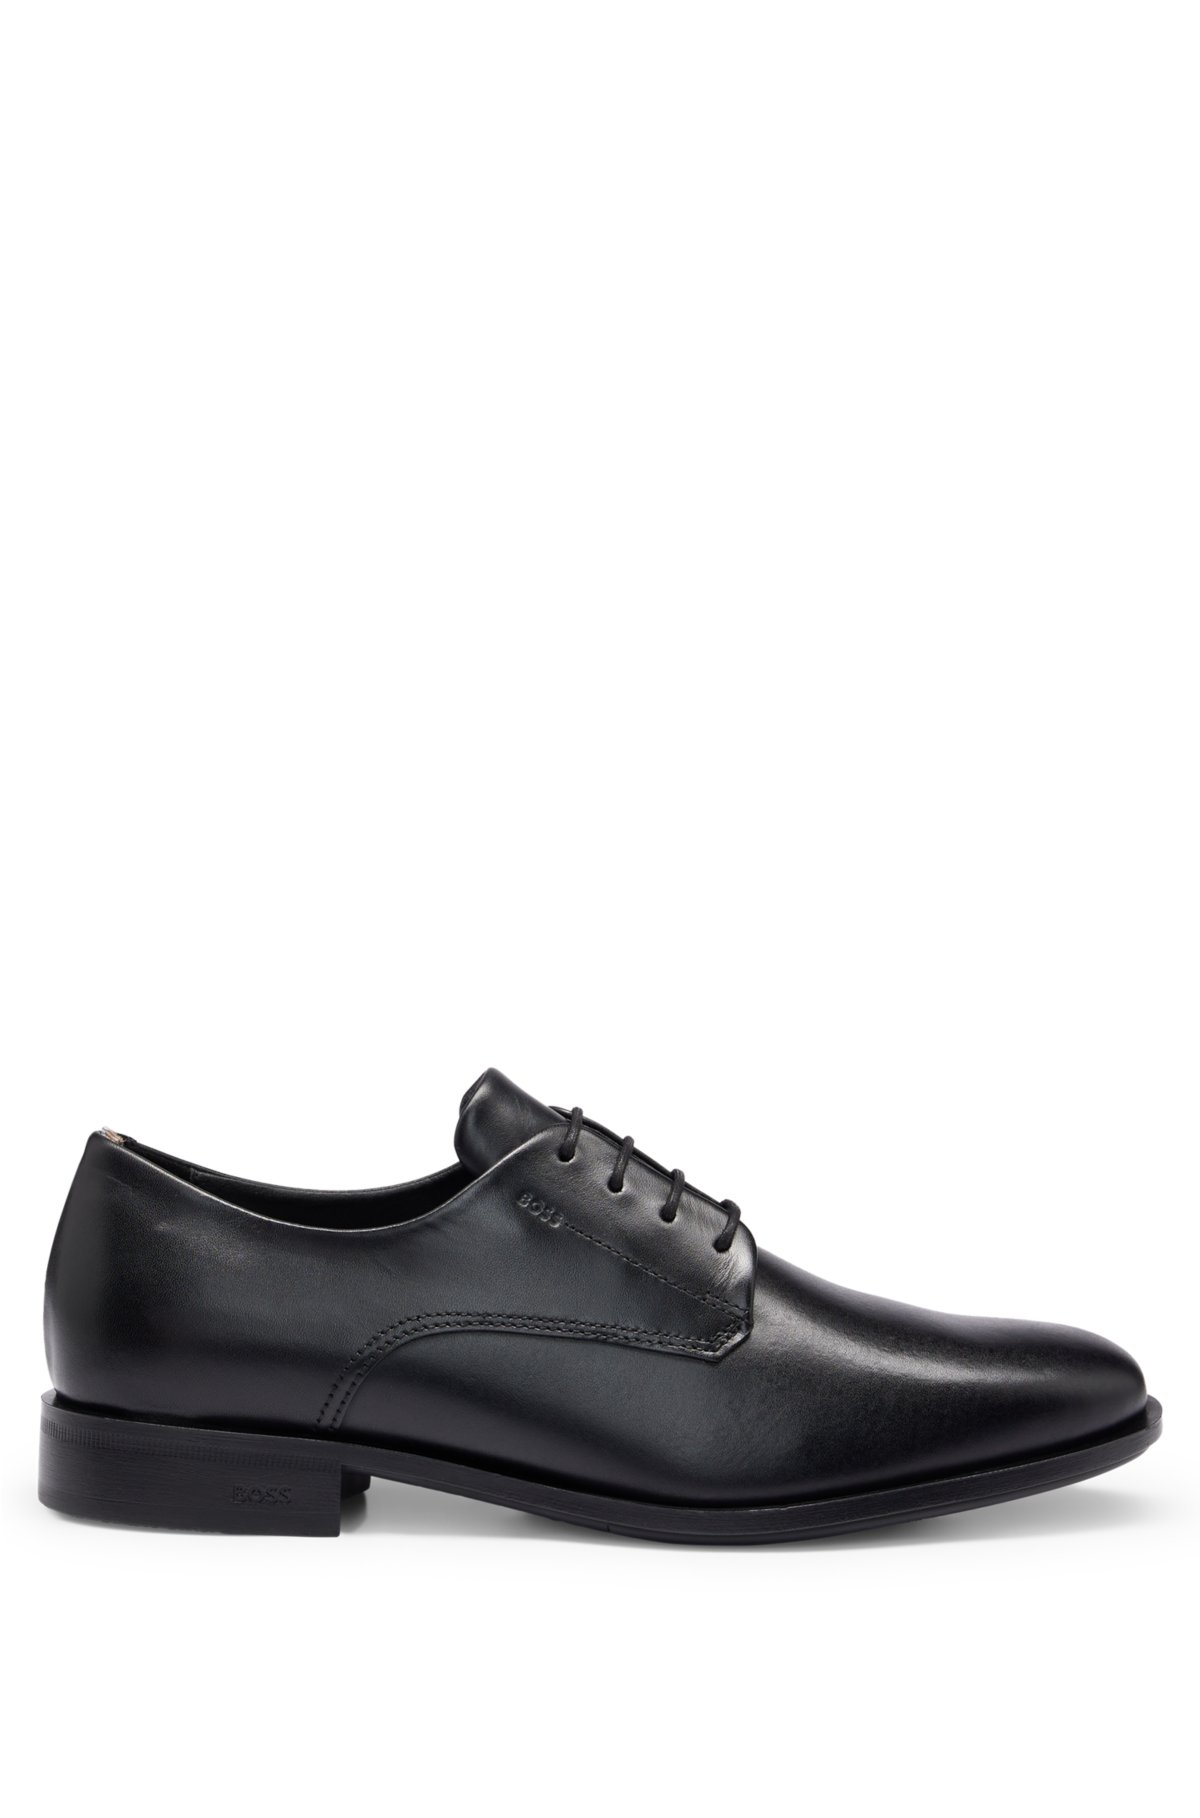 BOSS - Derby shoes in leather with embossed logo